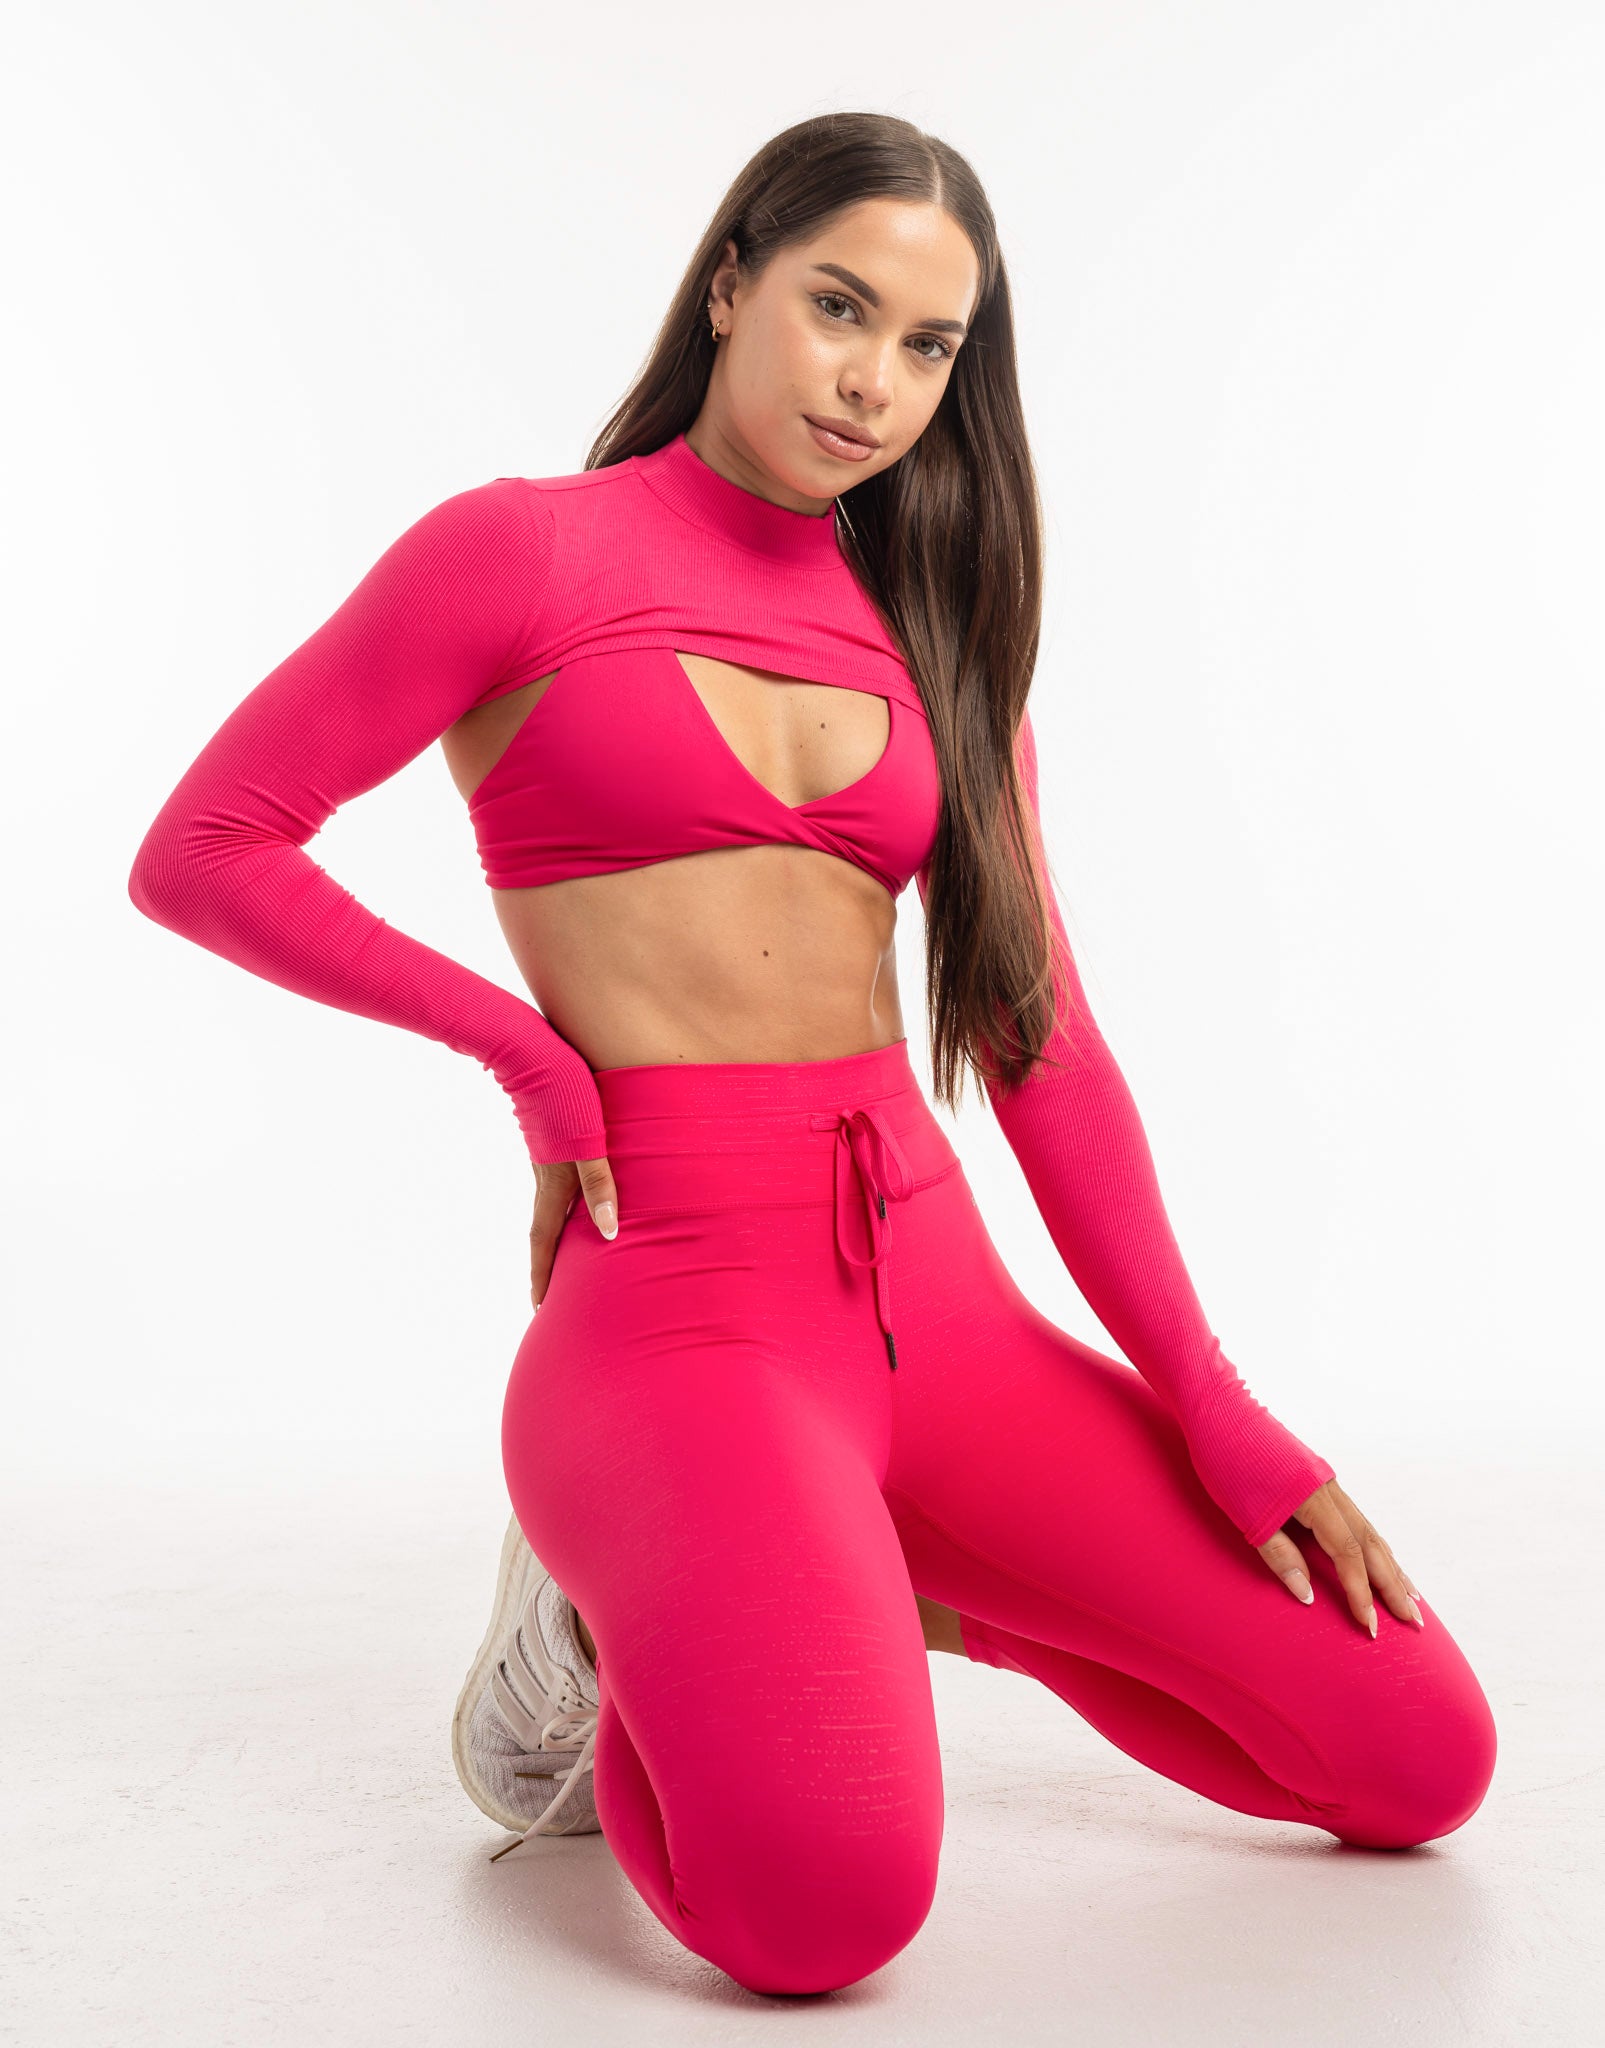 Ladies Tapered Joggers V2 - Bright Pink